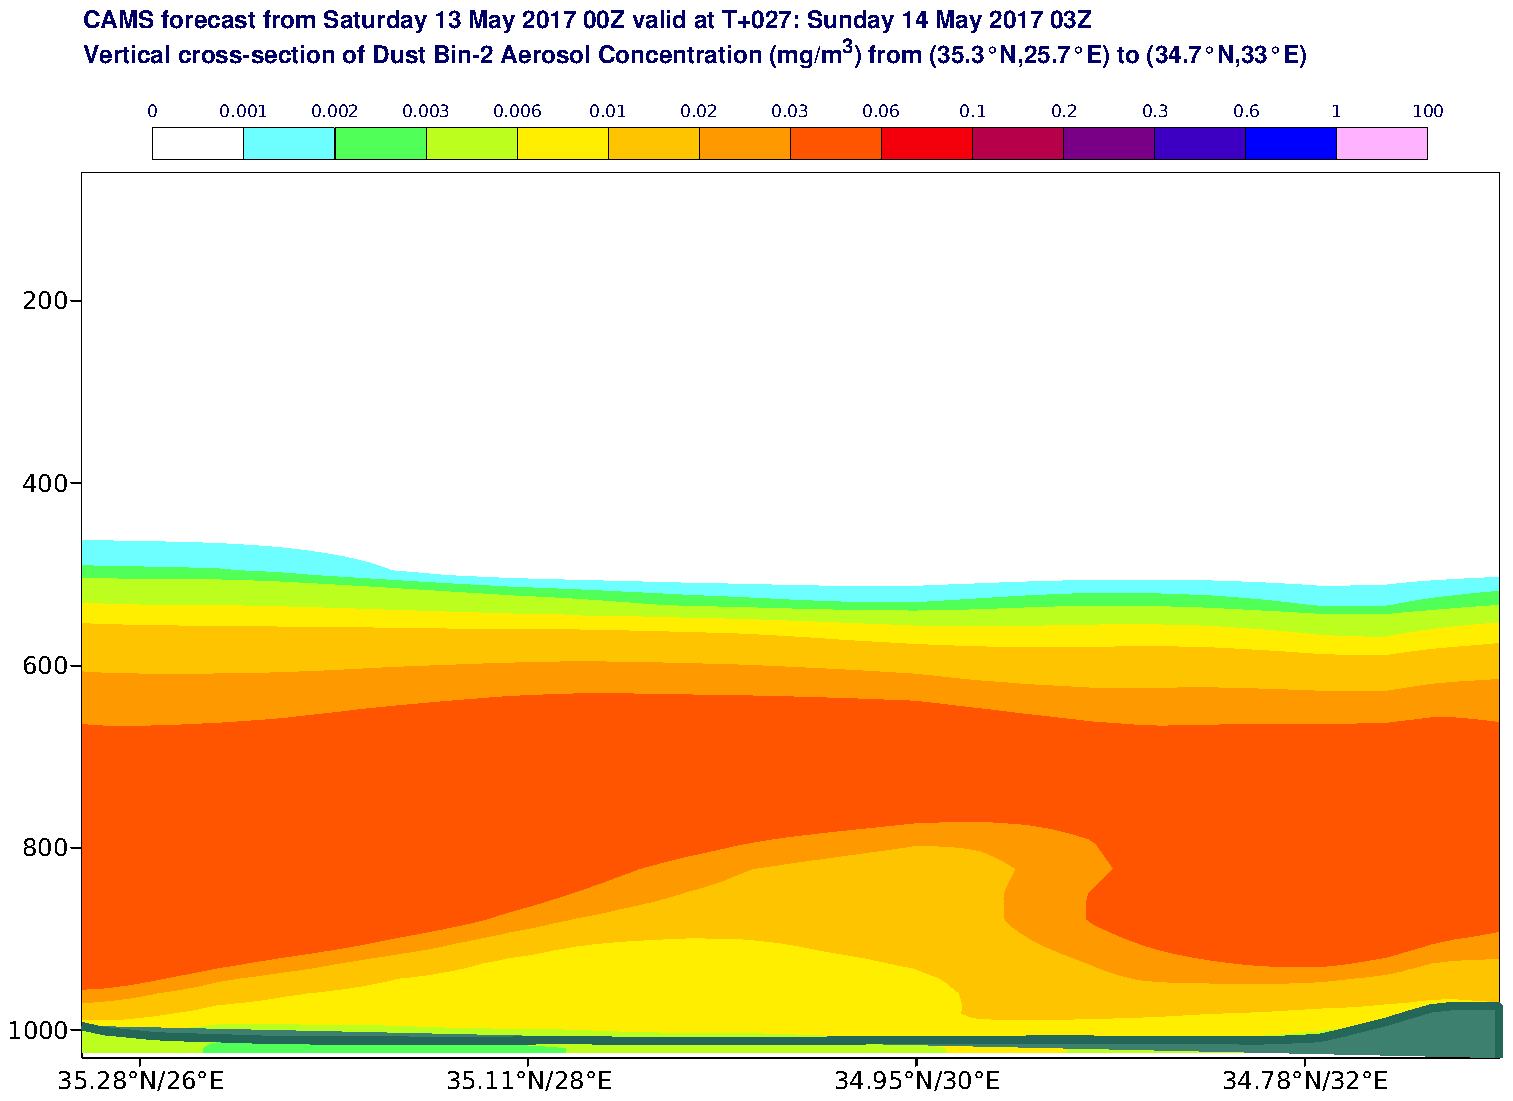 Vertical cross-section of Dust Bin-2 Aerosol Concentration (mg/m3) valid at T27 - 2017-05-14 03:00